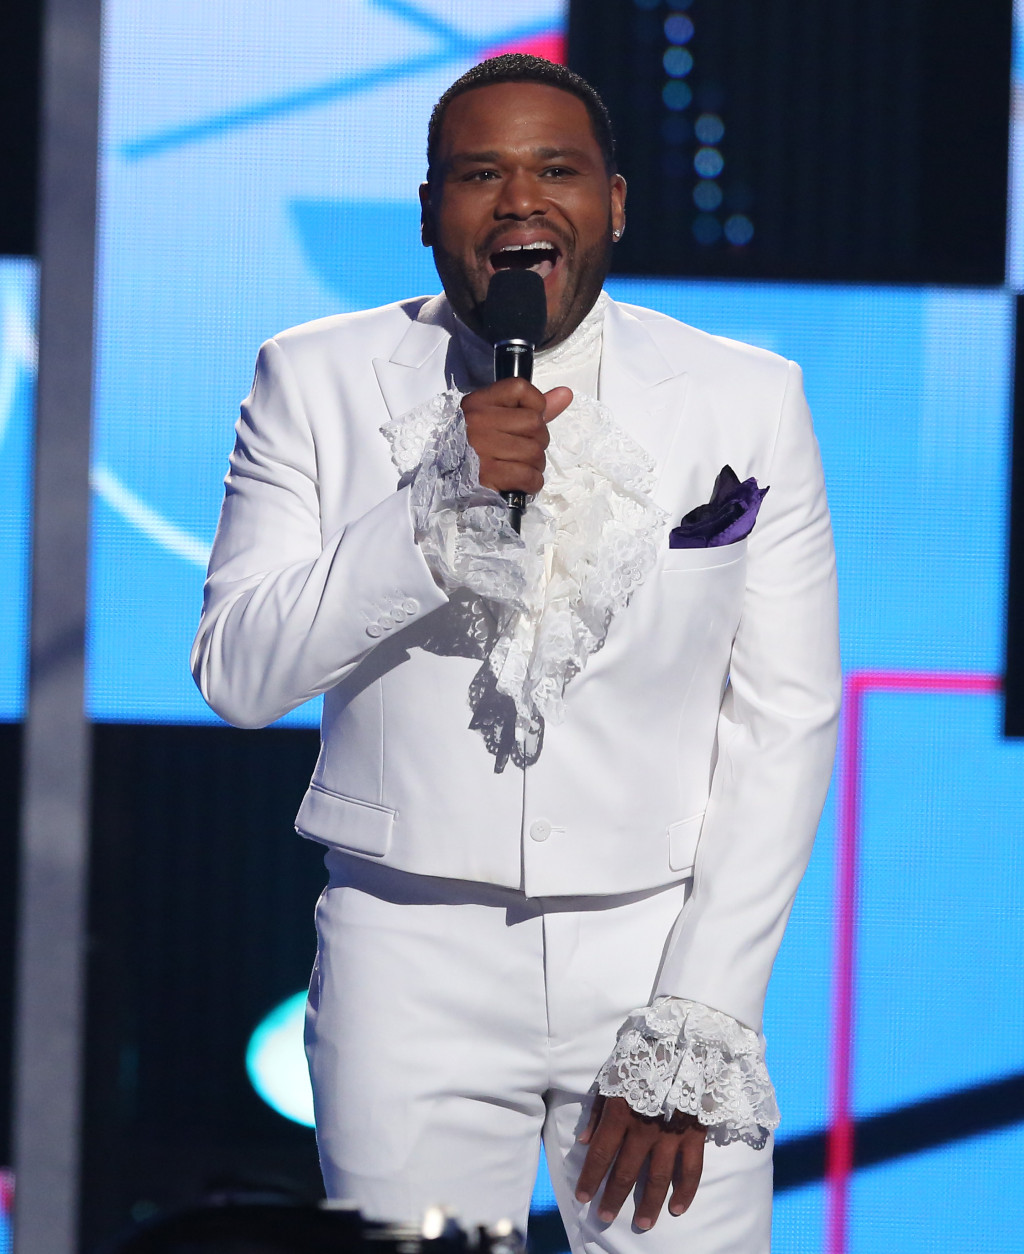 Host Anthony Anderson speaks at the BET Awards at the Microsoft Theater on Sunday, June 26, 2016, in Los Angeles. (Photo by Matt Sayles/Invision/AP)